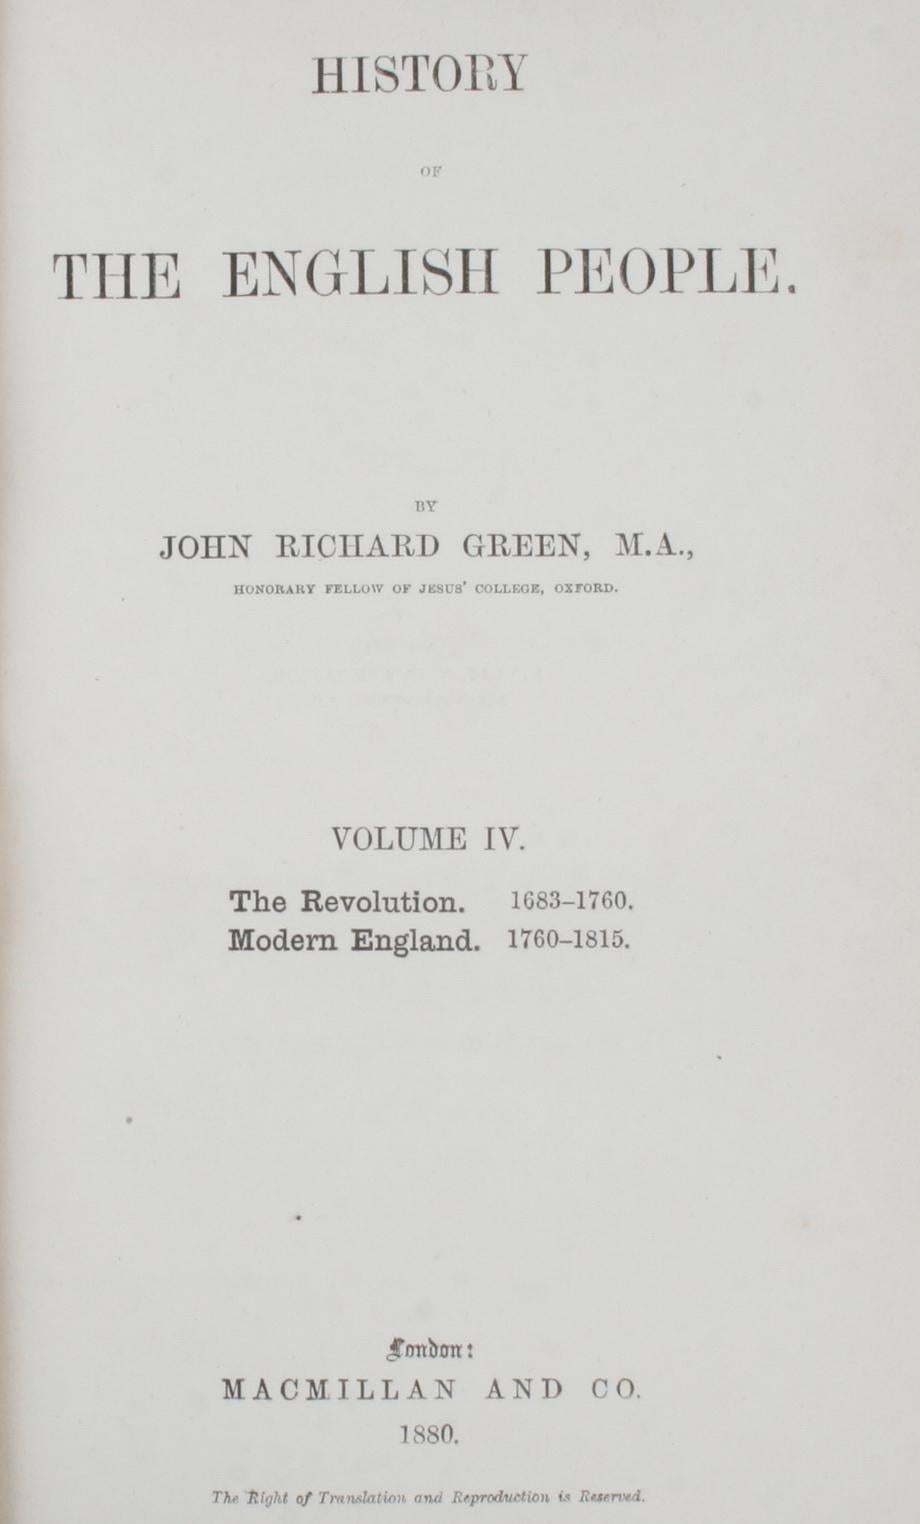 History of the English People in Four Volumes by John Richard Green, M.A., 1877 7